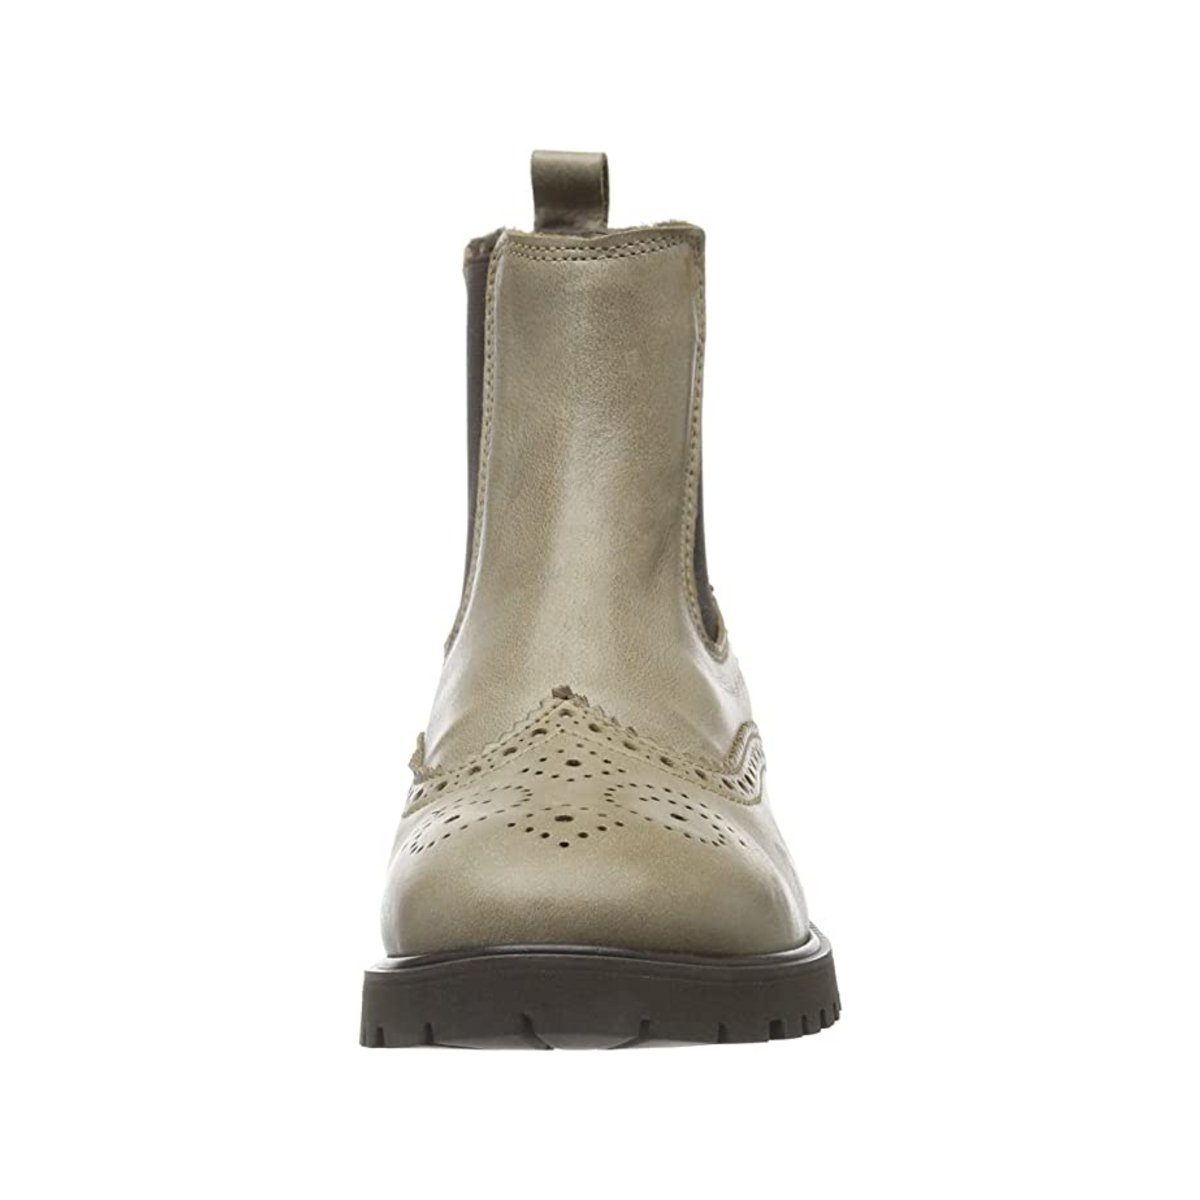 Clic beige Chelseaboots (1-tlg)